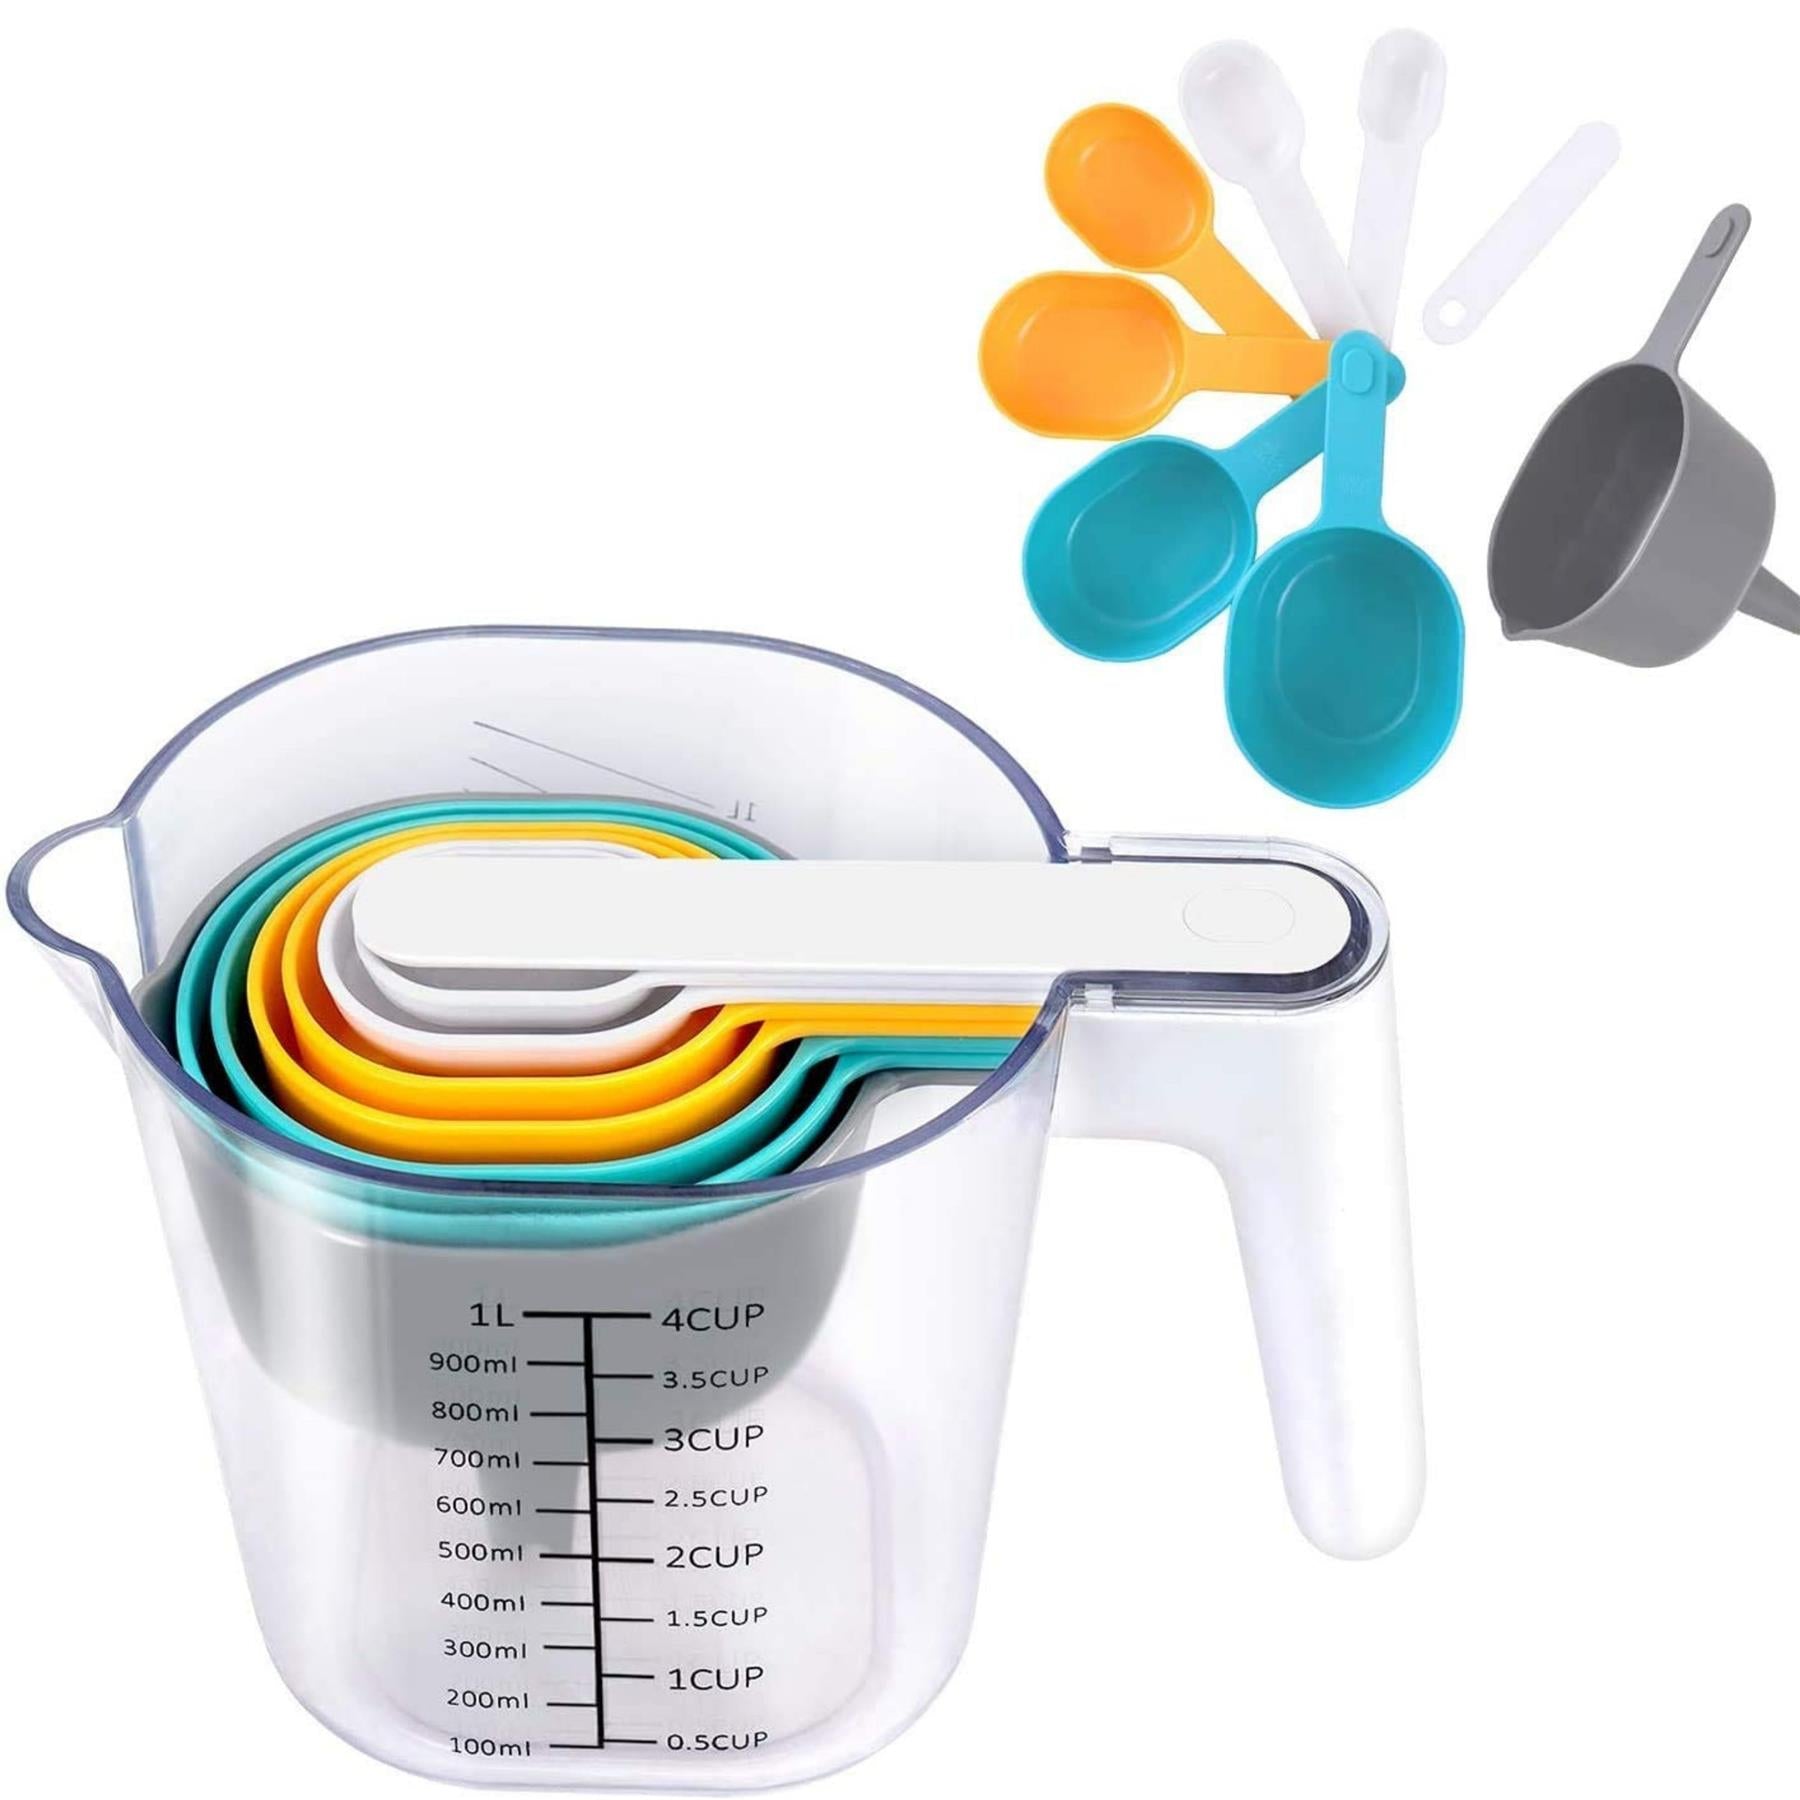 9pcs Measuring Cups & Spoons Set by Geezy - UKBuyZone